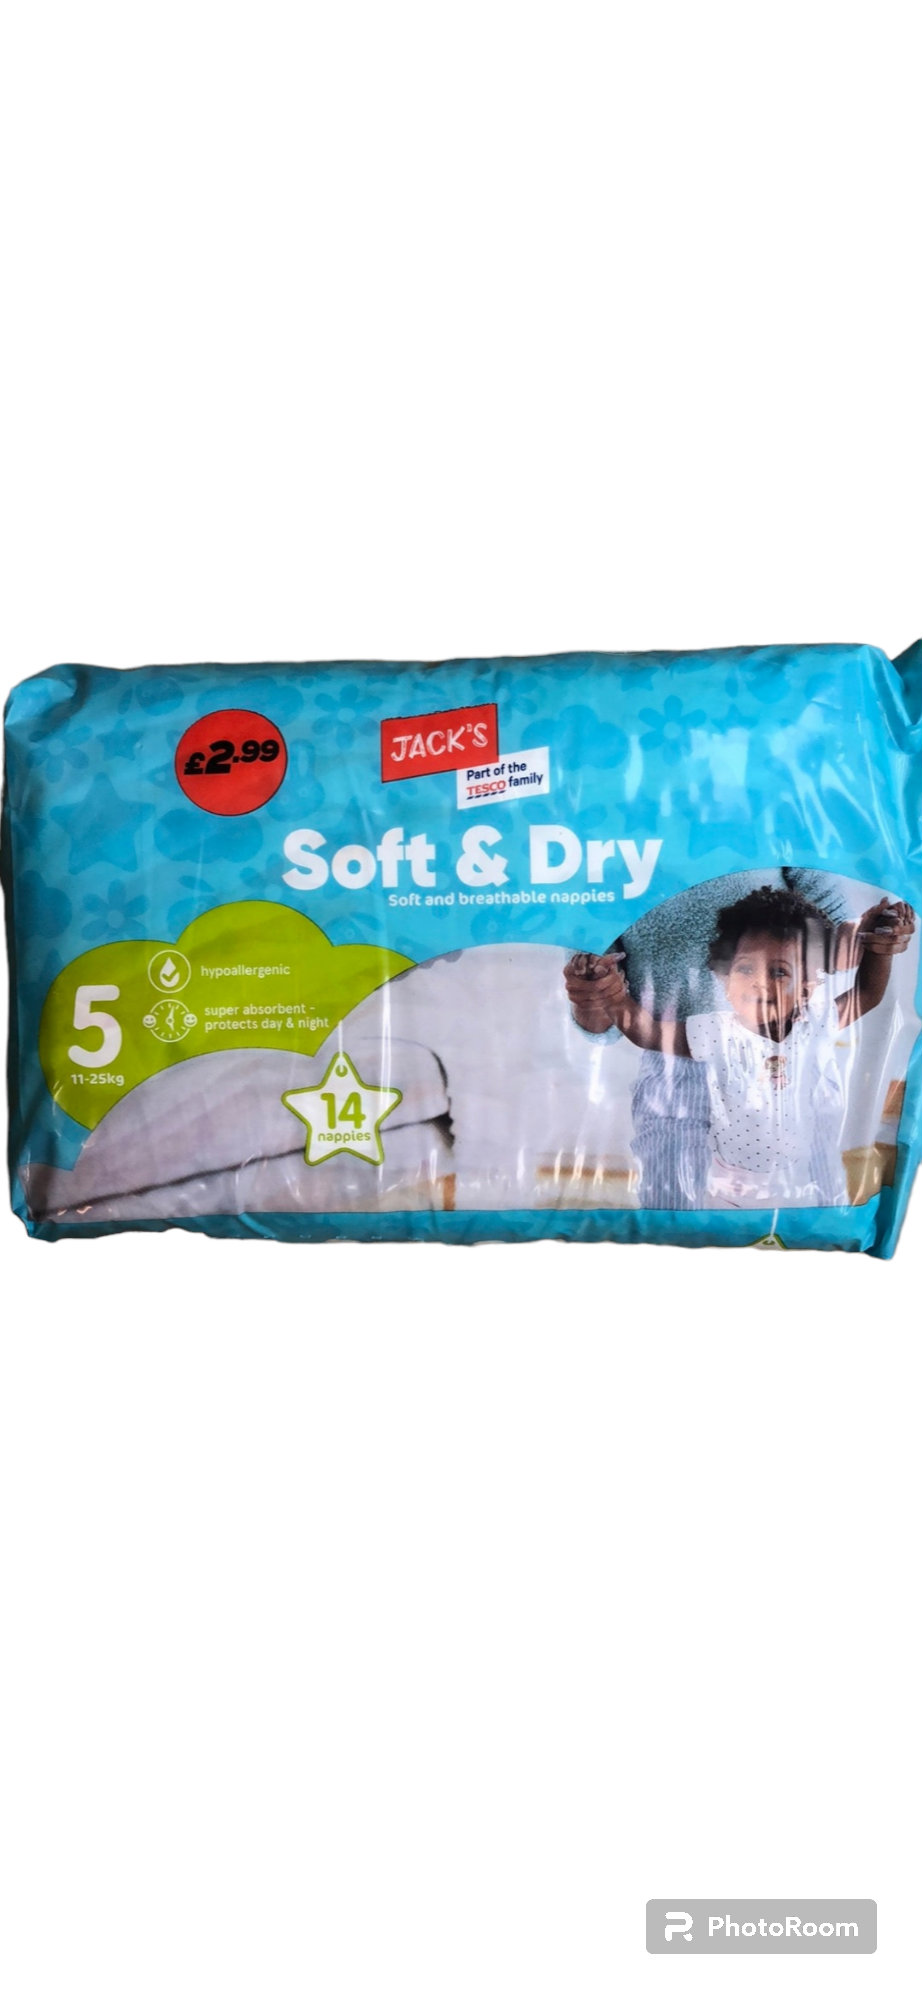 Jacks soft and dry 11-25kg 14 nappies